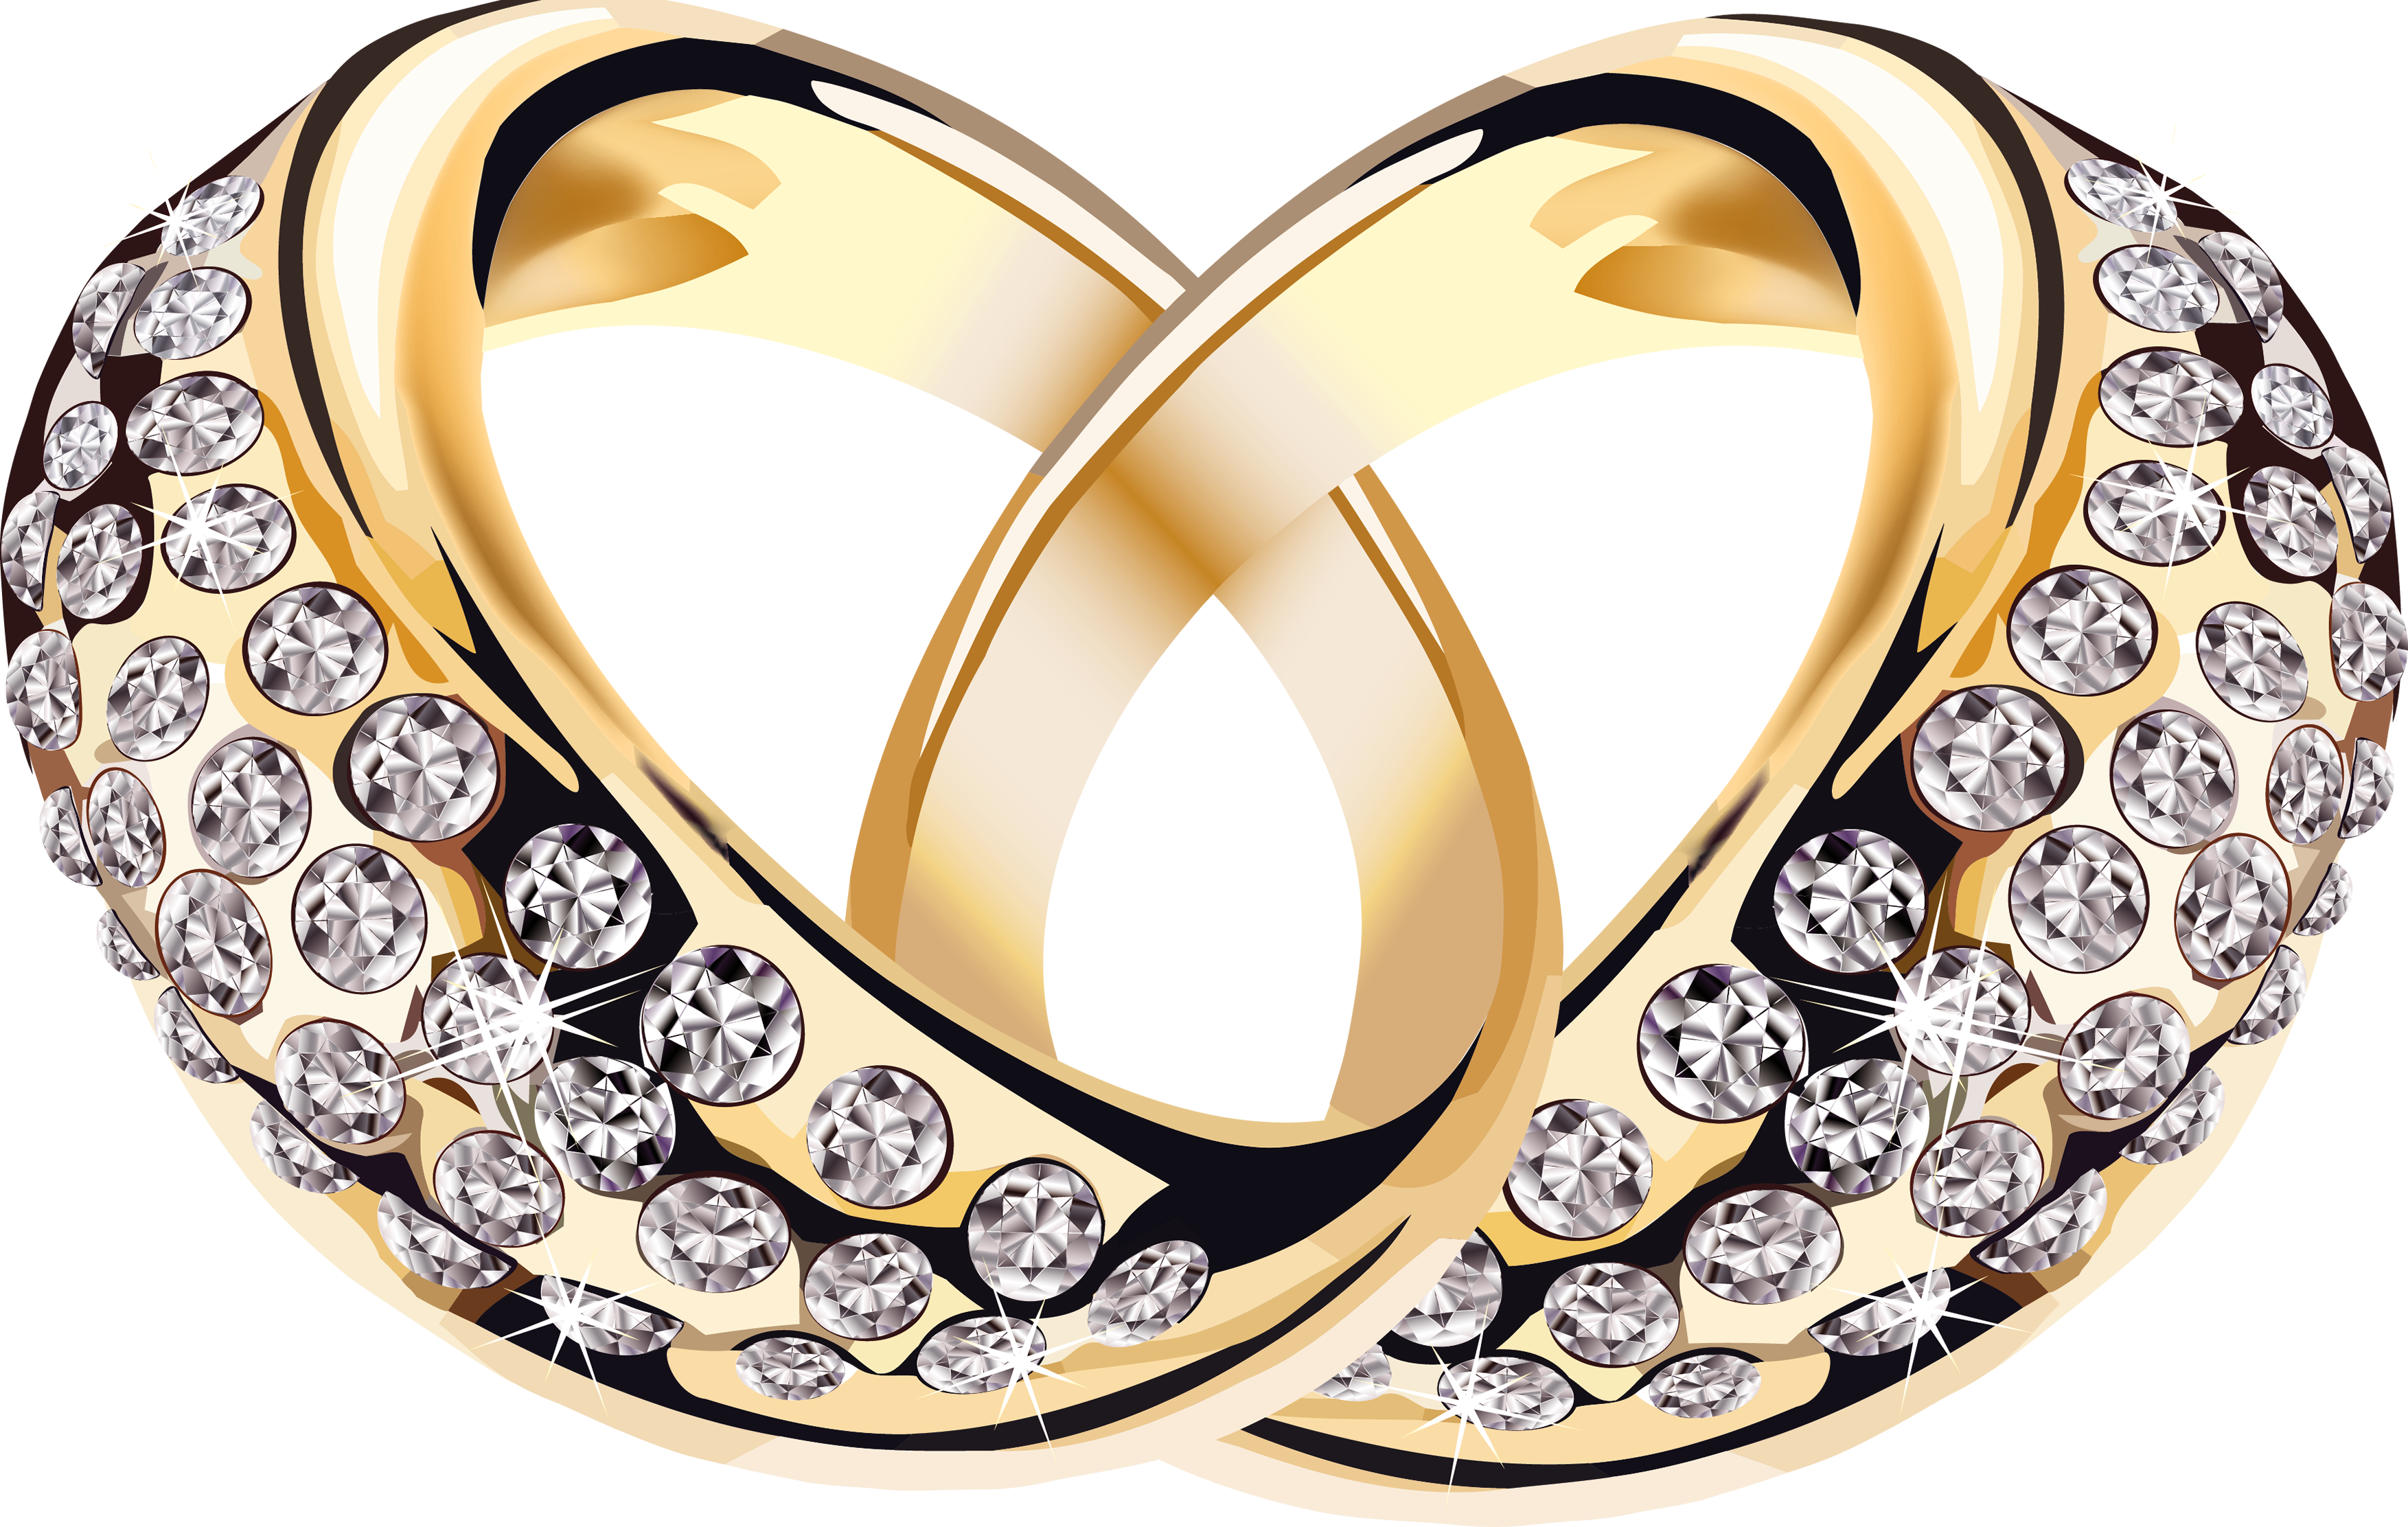 Jewelry Png Image - Jewellery, Transparent background PNG HD thumbnail